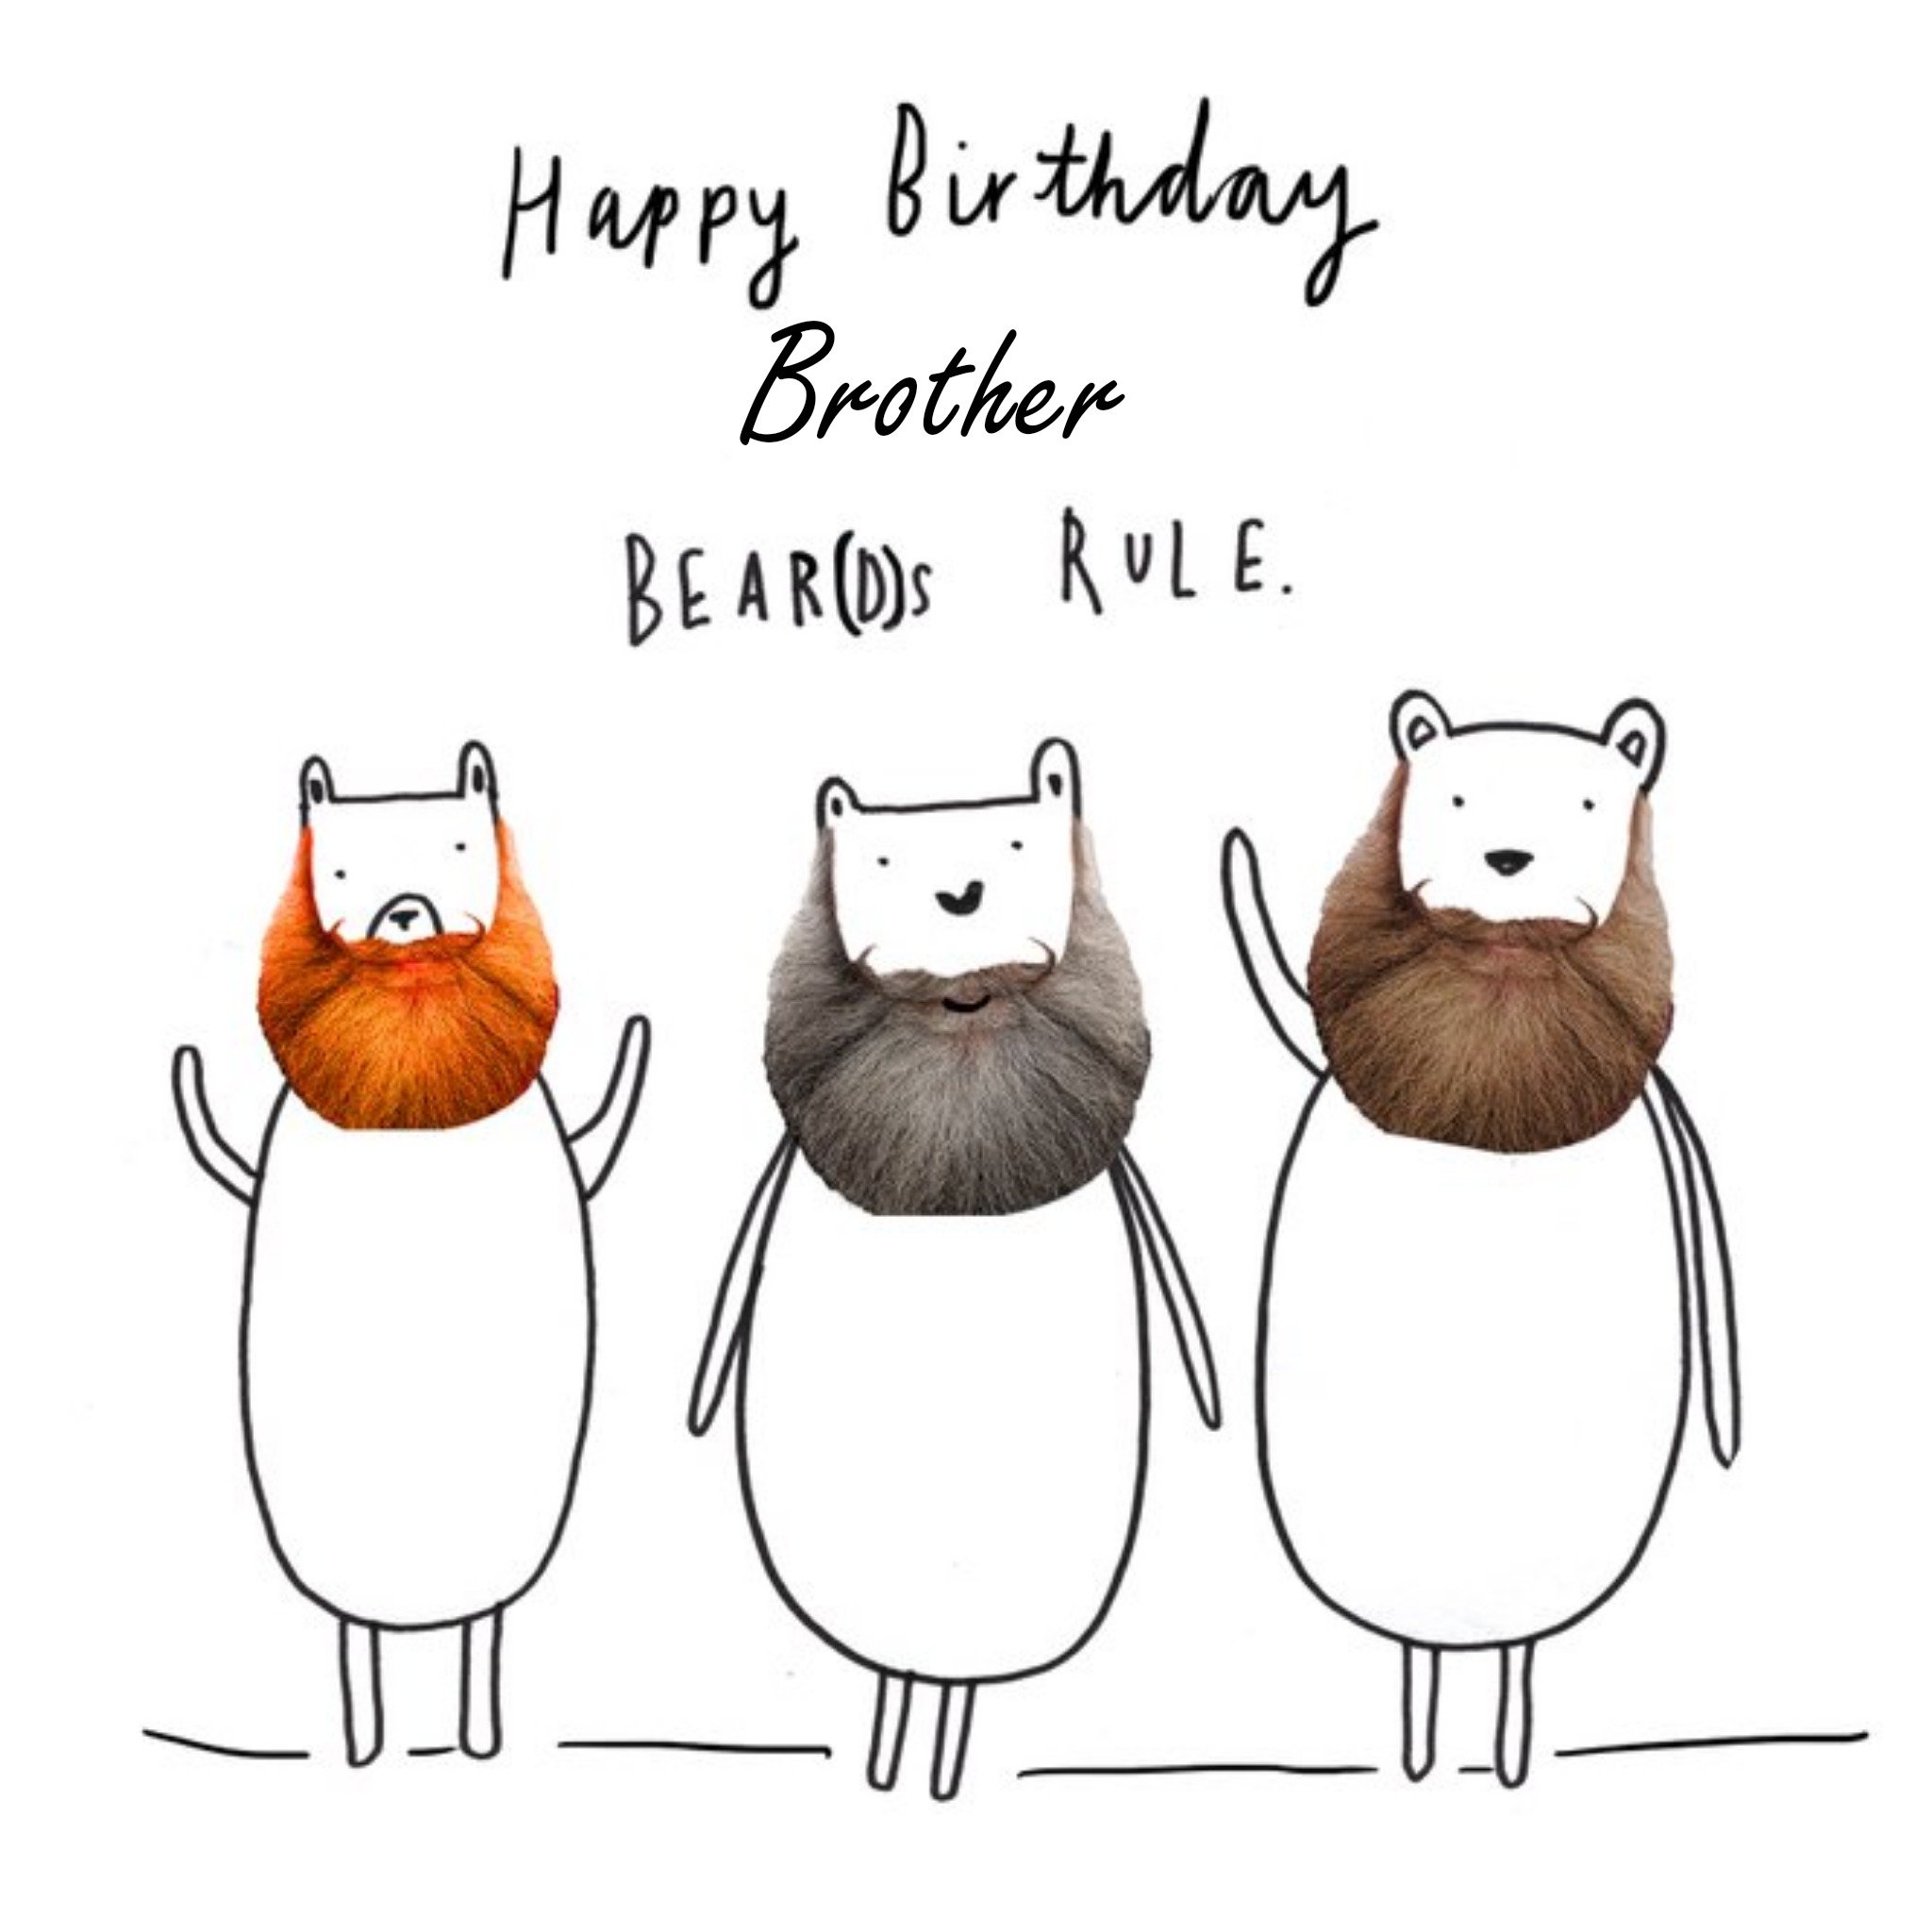 Moonpig Bear(D)S Rule Birthday Brother Card, Square